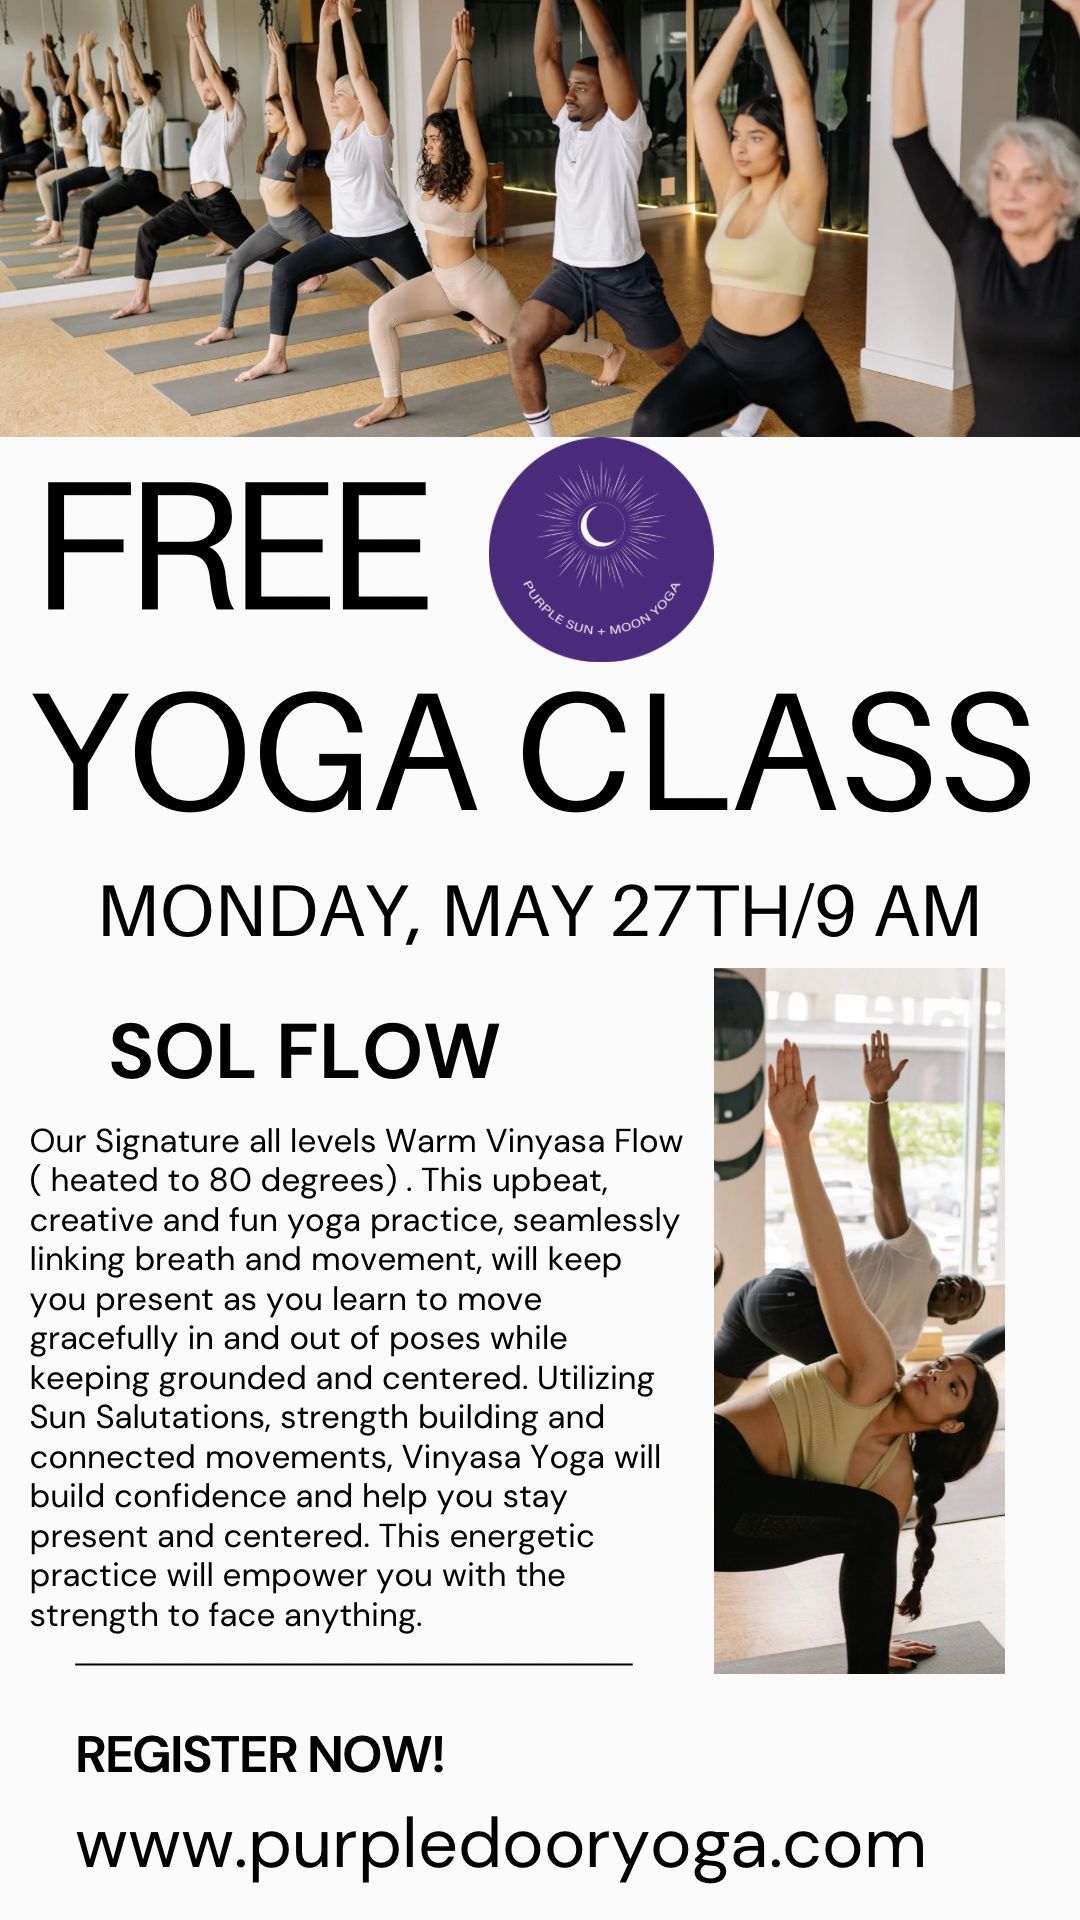 We have some spots available. FREE Sol Flow Yoga Class with Maggie & Andrew